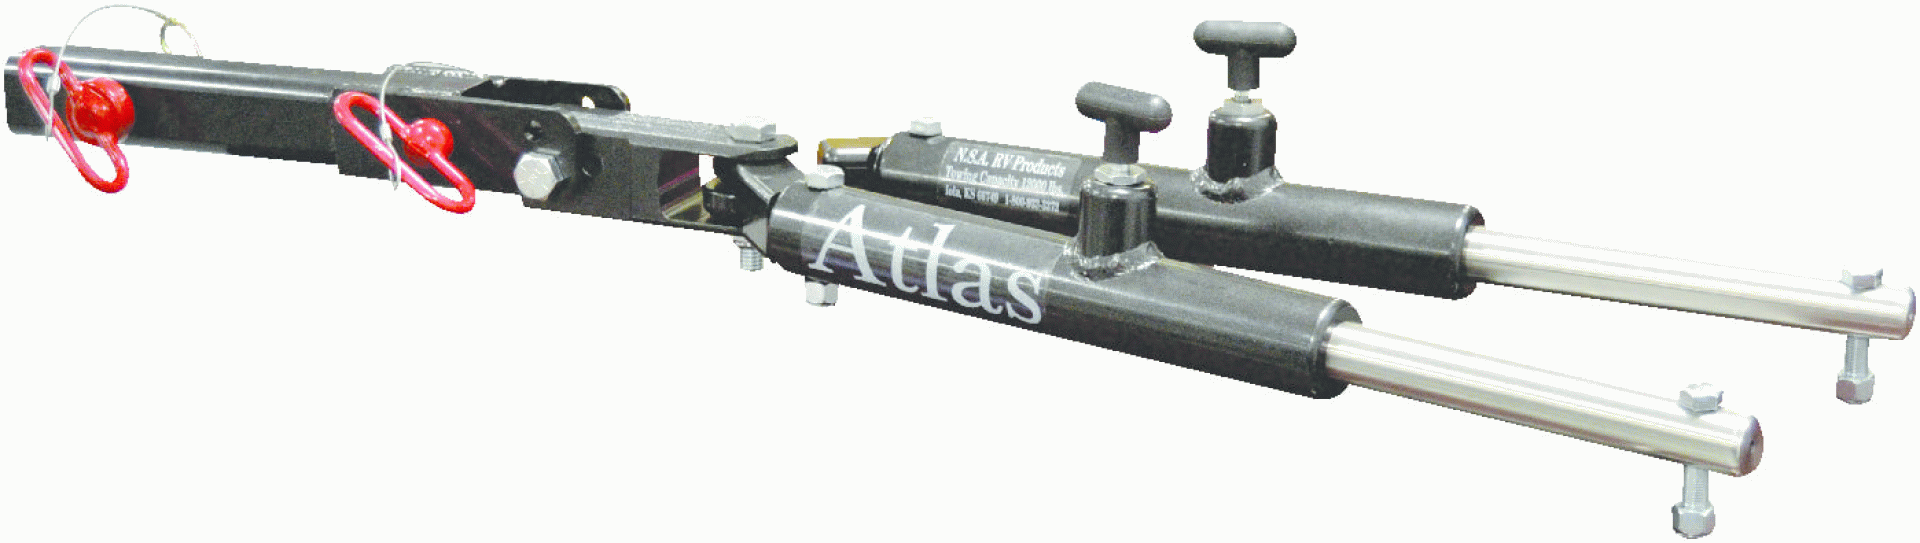 N.S.A RV PRODUCTS | 10003 | ATLAS TOW BAR